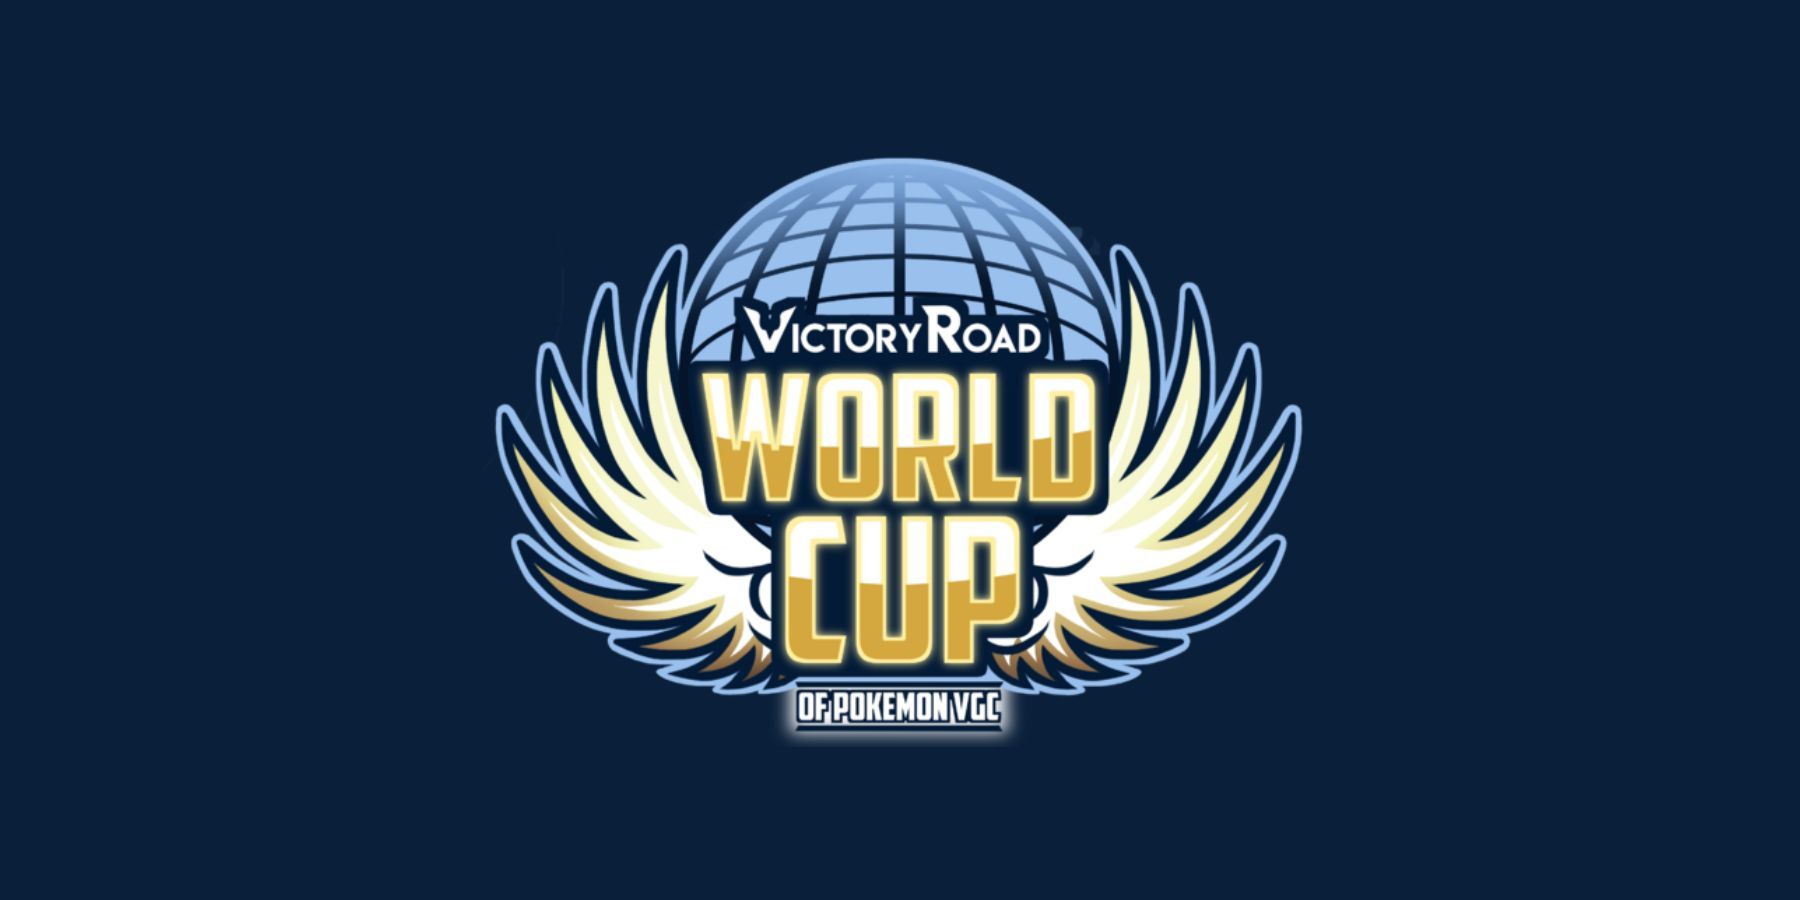 Victory Road World Cup Website